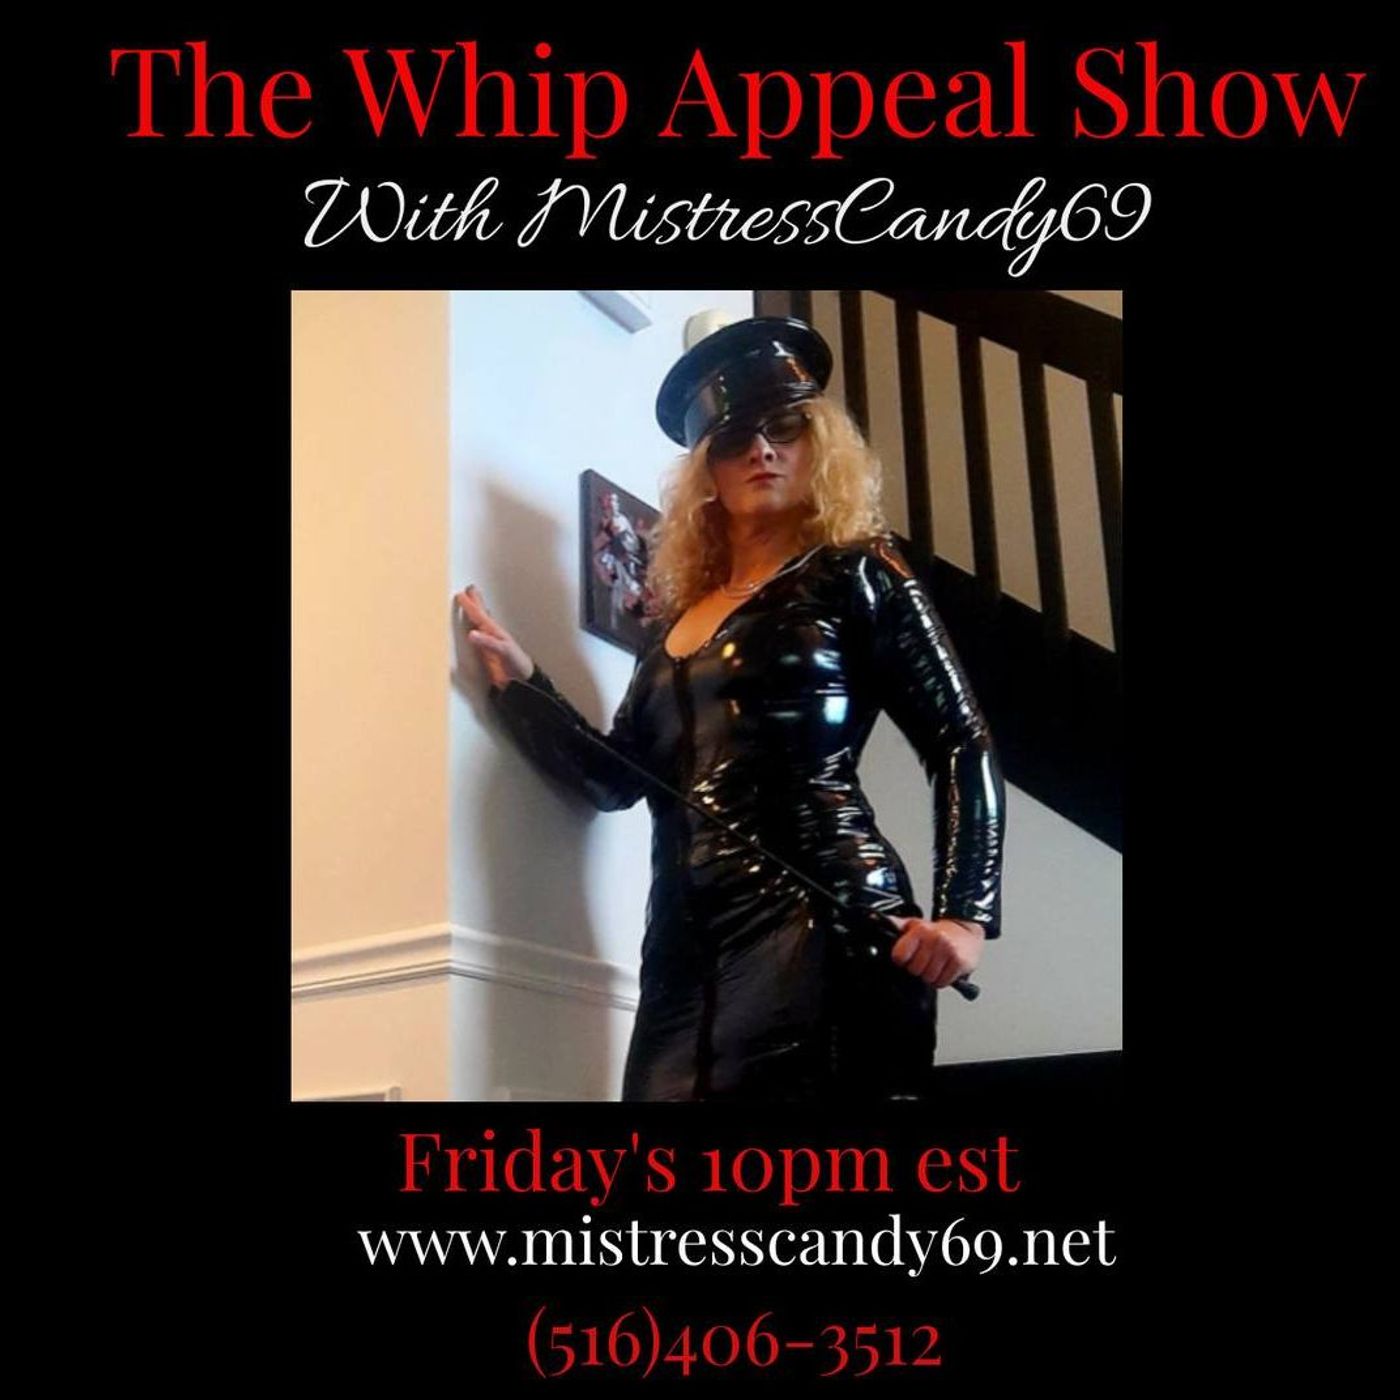 09/04/2022 The Whip Appeal- MistressCandy69